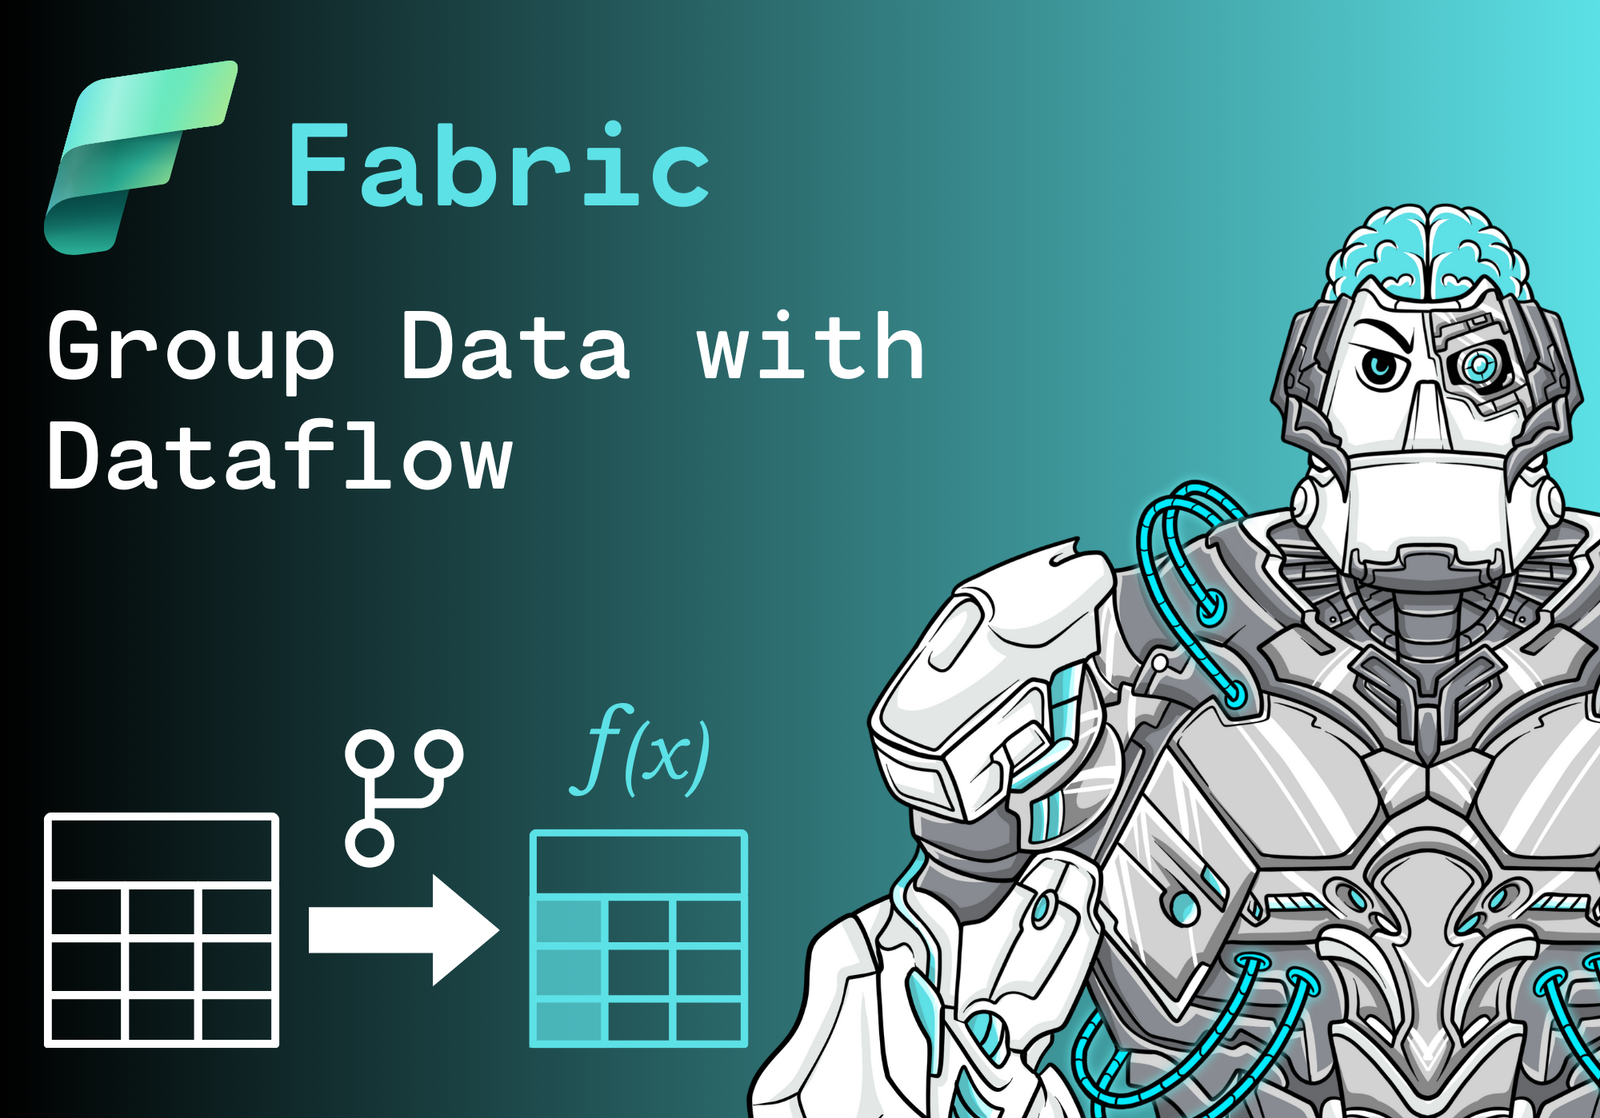 How to group Data in Fabric using a Dataflow